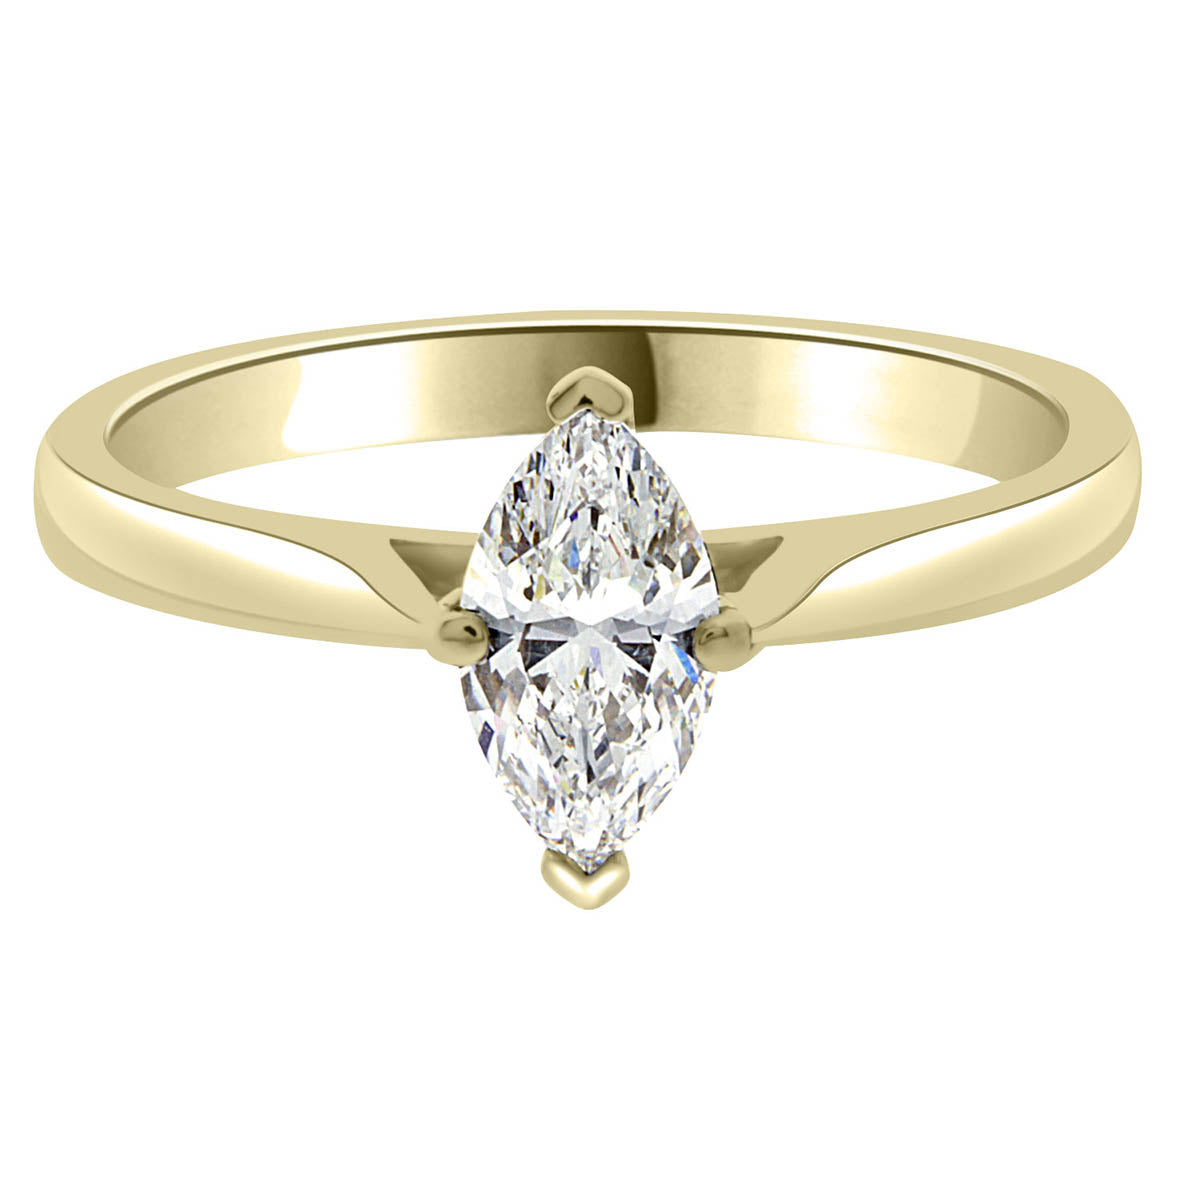 Marquise Solitaire Engagement Ring made from yellow gold